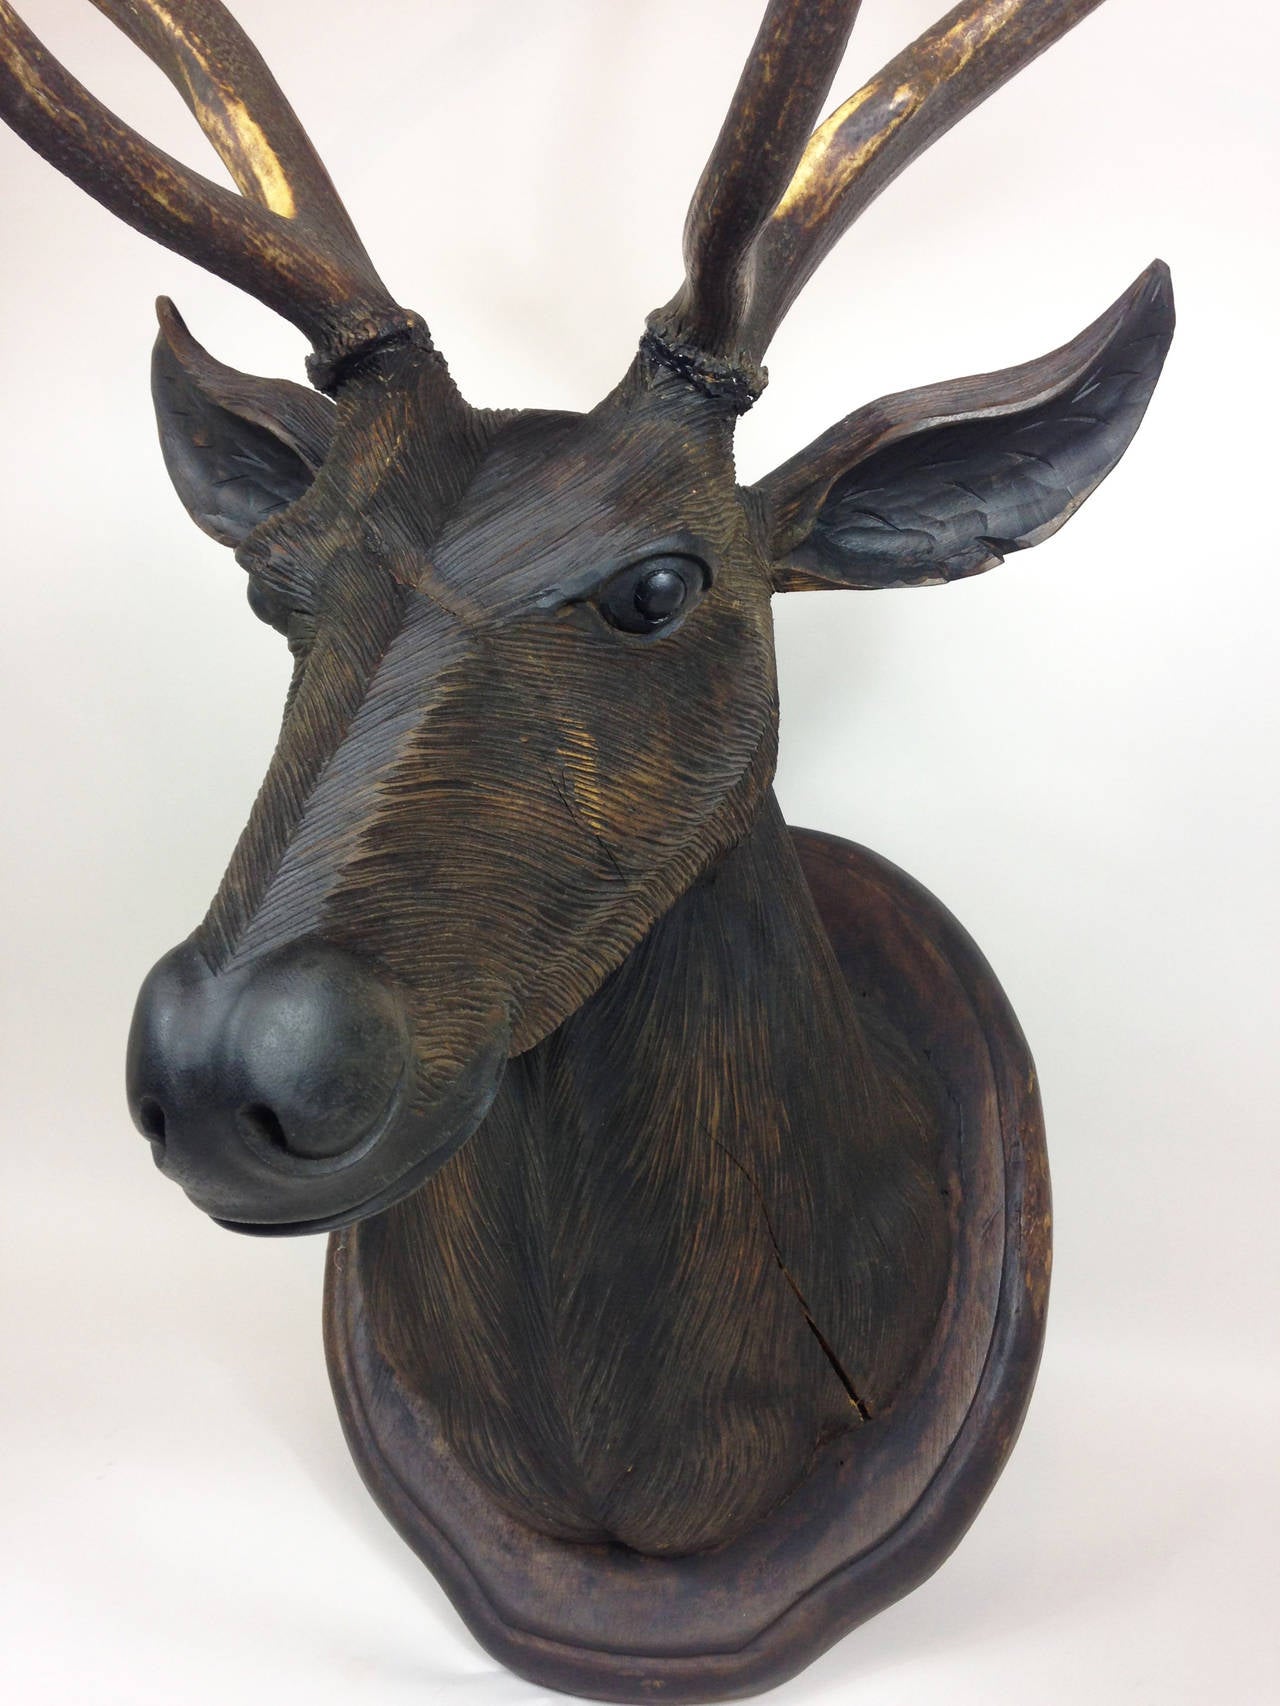 A wonderful full-sized mounted stag head with natural antlers.

Carved in the Black Forest style from what appears to be a single piece of wood and mounted on a later shield.

A stable age related tension crack to the left hand side of the mount